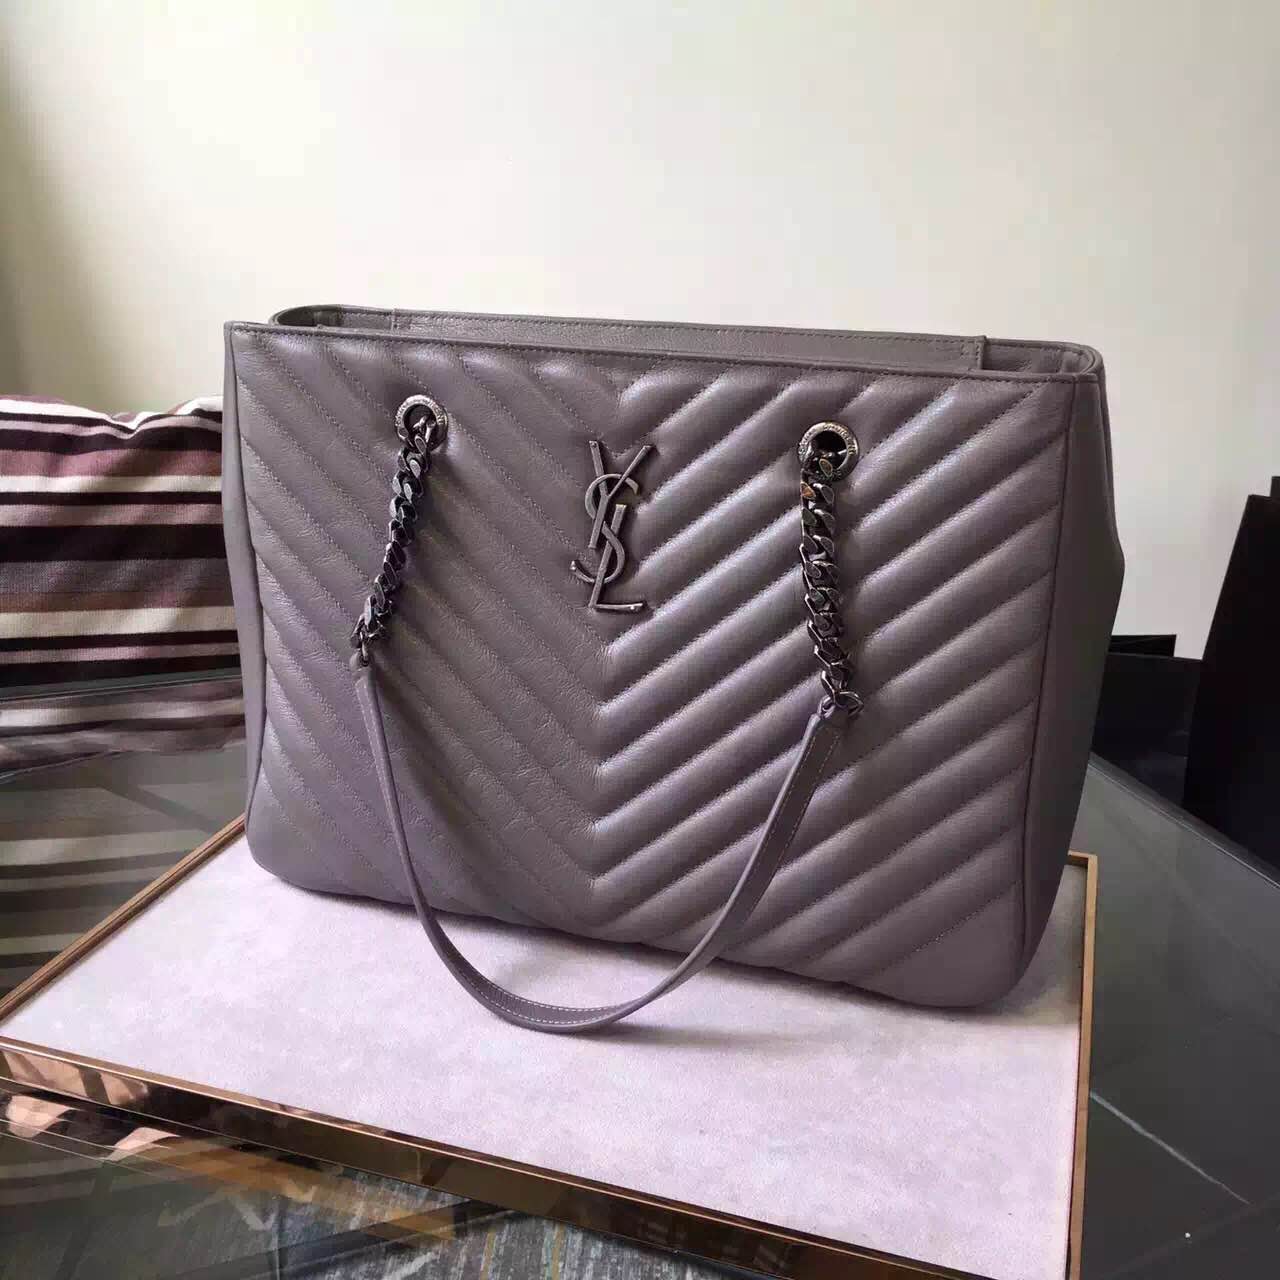 New Arrival!2016 Cheap YSL Out Sale with Free Shipping-Saint Laurent Classic Monogram Shopping Bag in Marble MATELASSE Leather